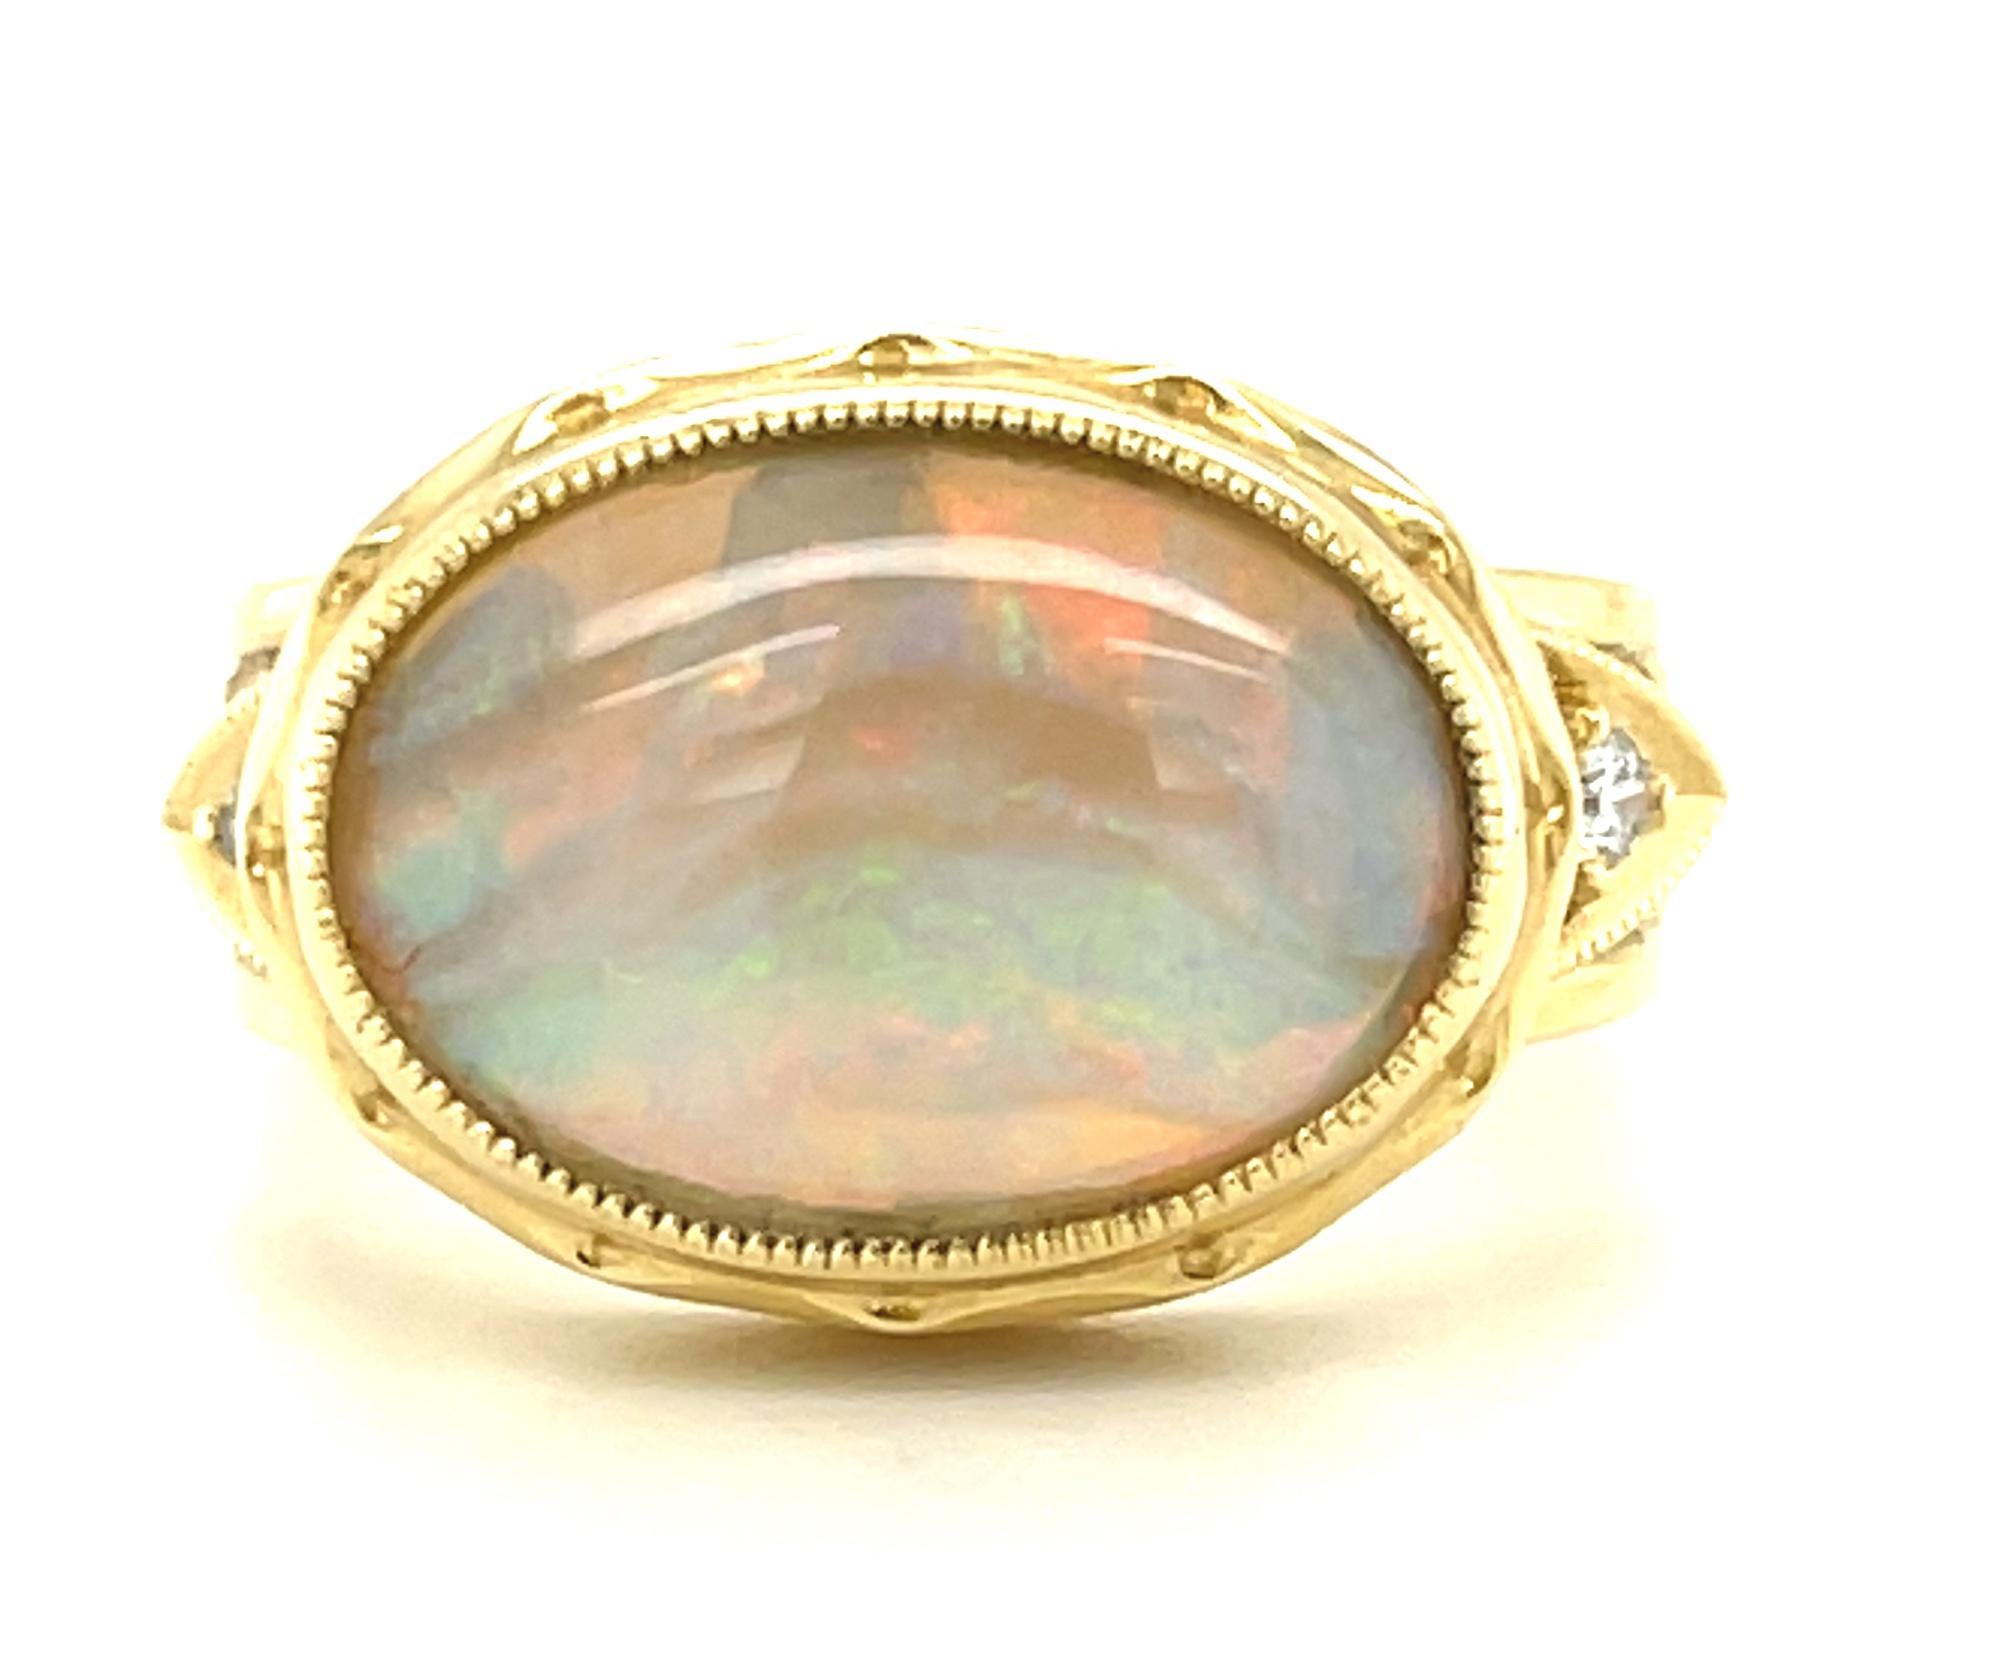 If you love rainbows, you'll love this gorgeous opal ring! The Australian opal featured in this ring weighs exactly 3 carats and displays gorgeous play-of-color in lively bands and brilliant flashes that dance throughout this phenomenal gemstone.